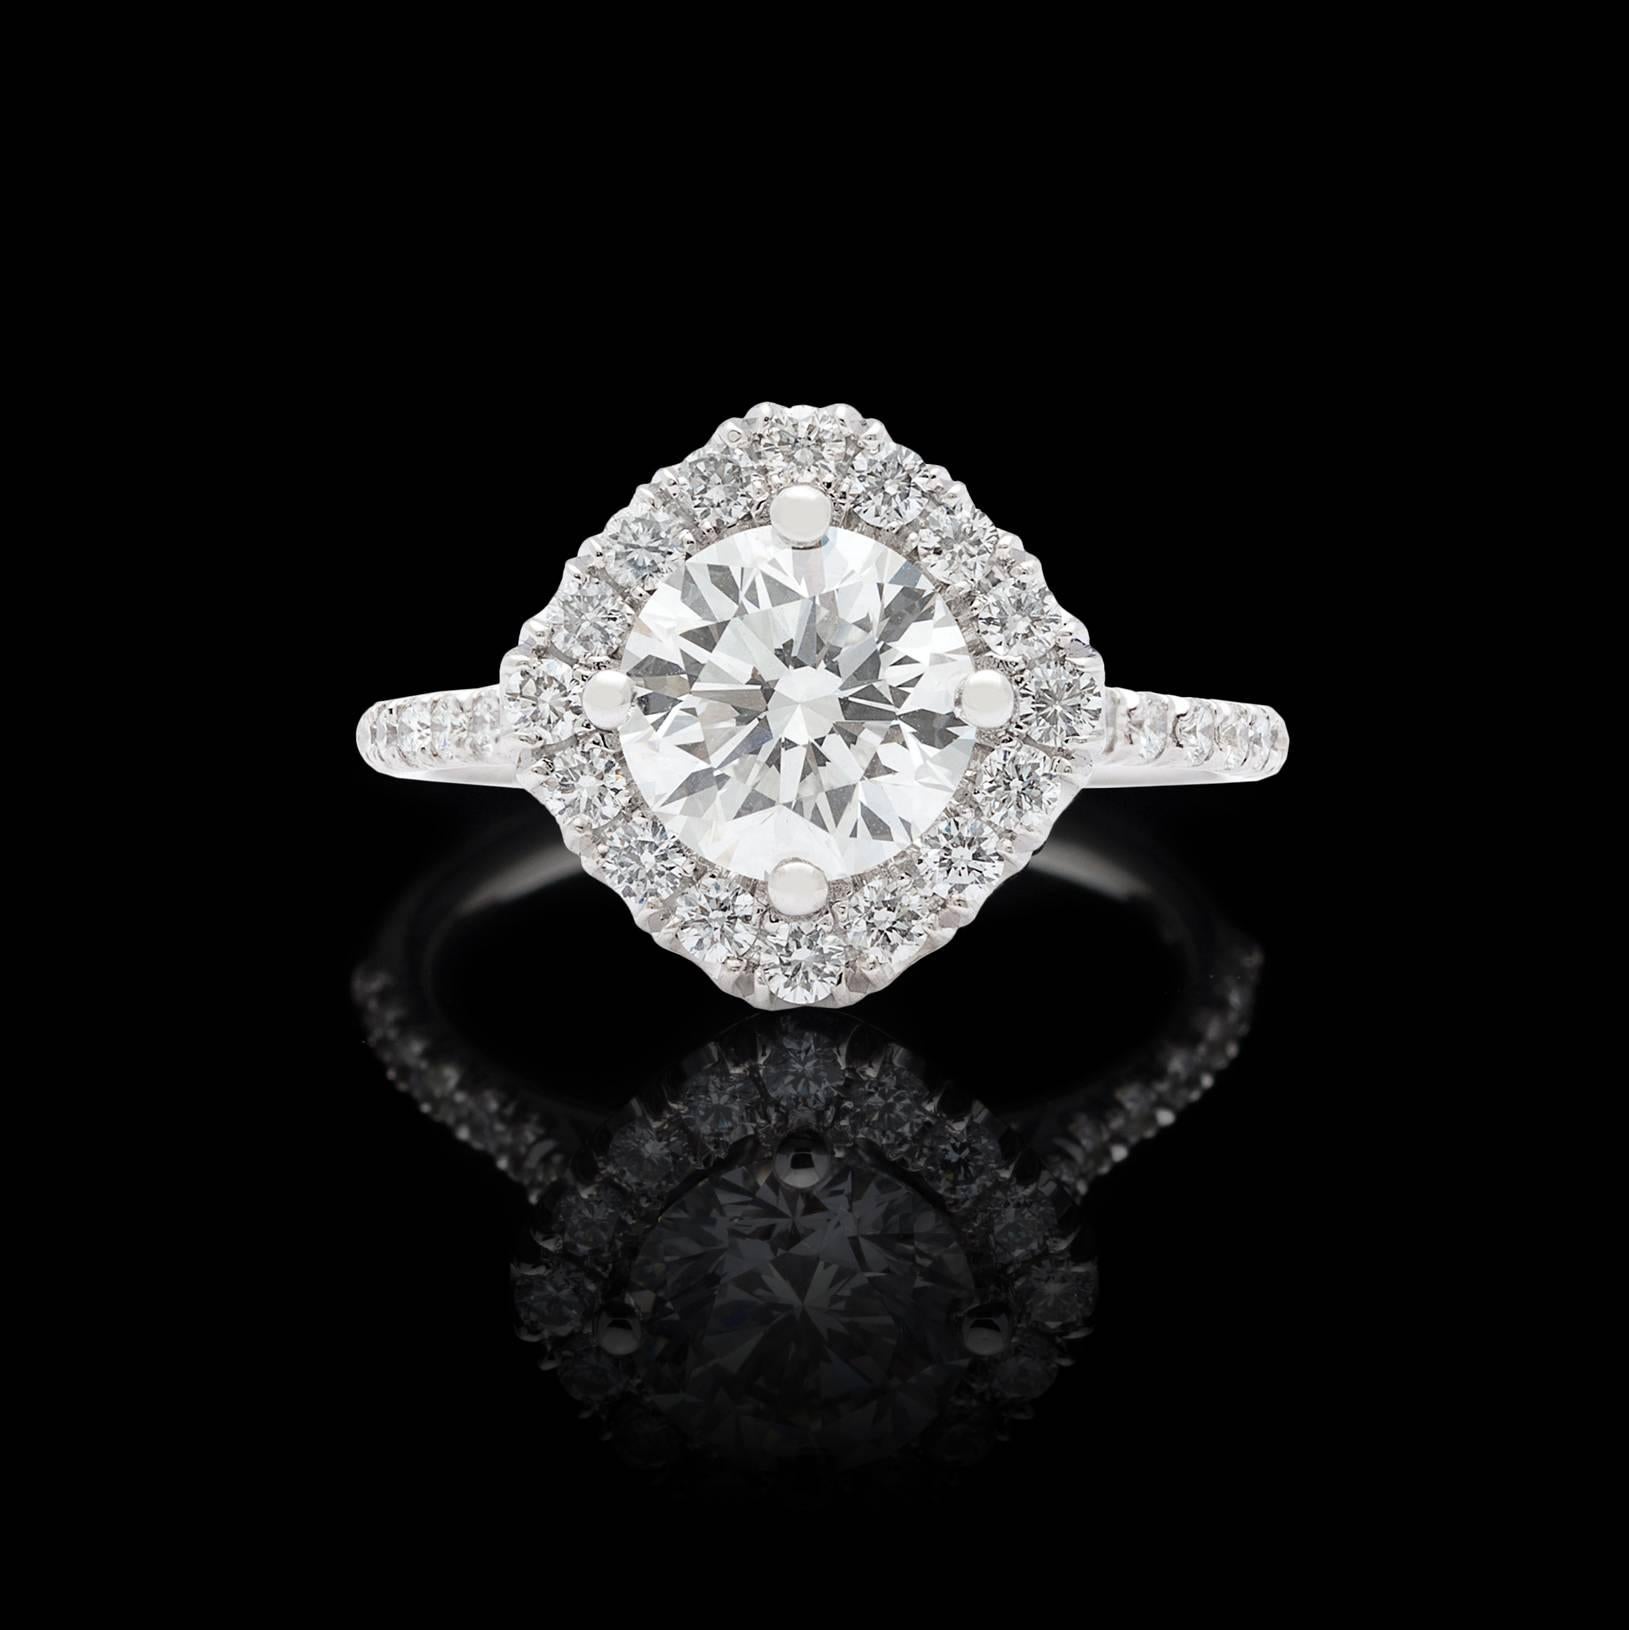 Stunning elegance meets exceptional quality in this handmade ring. A flashing 1.50 carat GIA graded H color VS1 clarity Round Brilliant Cut Diamond is perfectly set in this beautifully unique mounting, flanked by .65 carats of melee diamonds in the